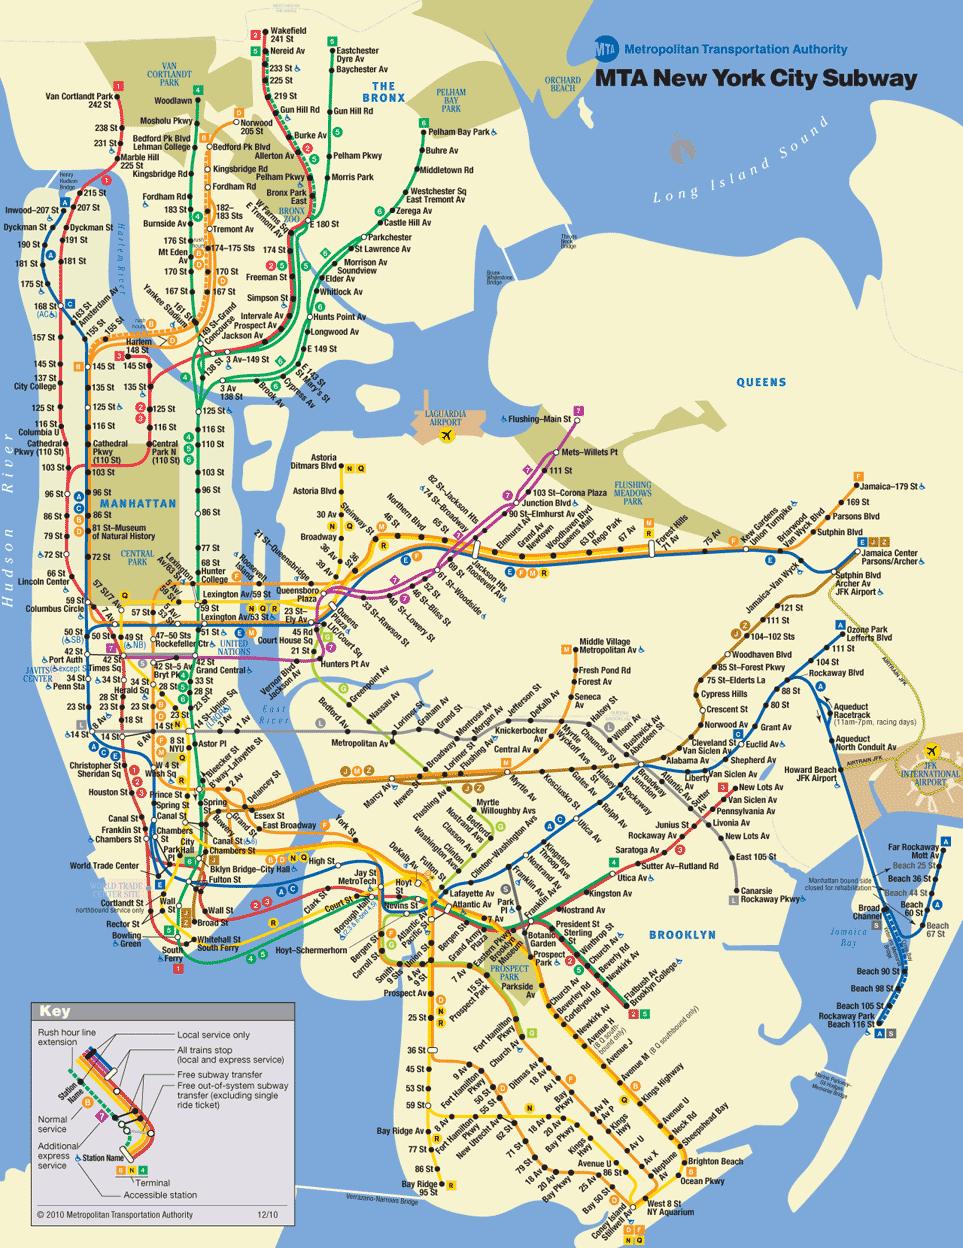 Examples of graphs : Transportation network Subway systems,